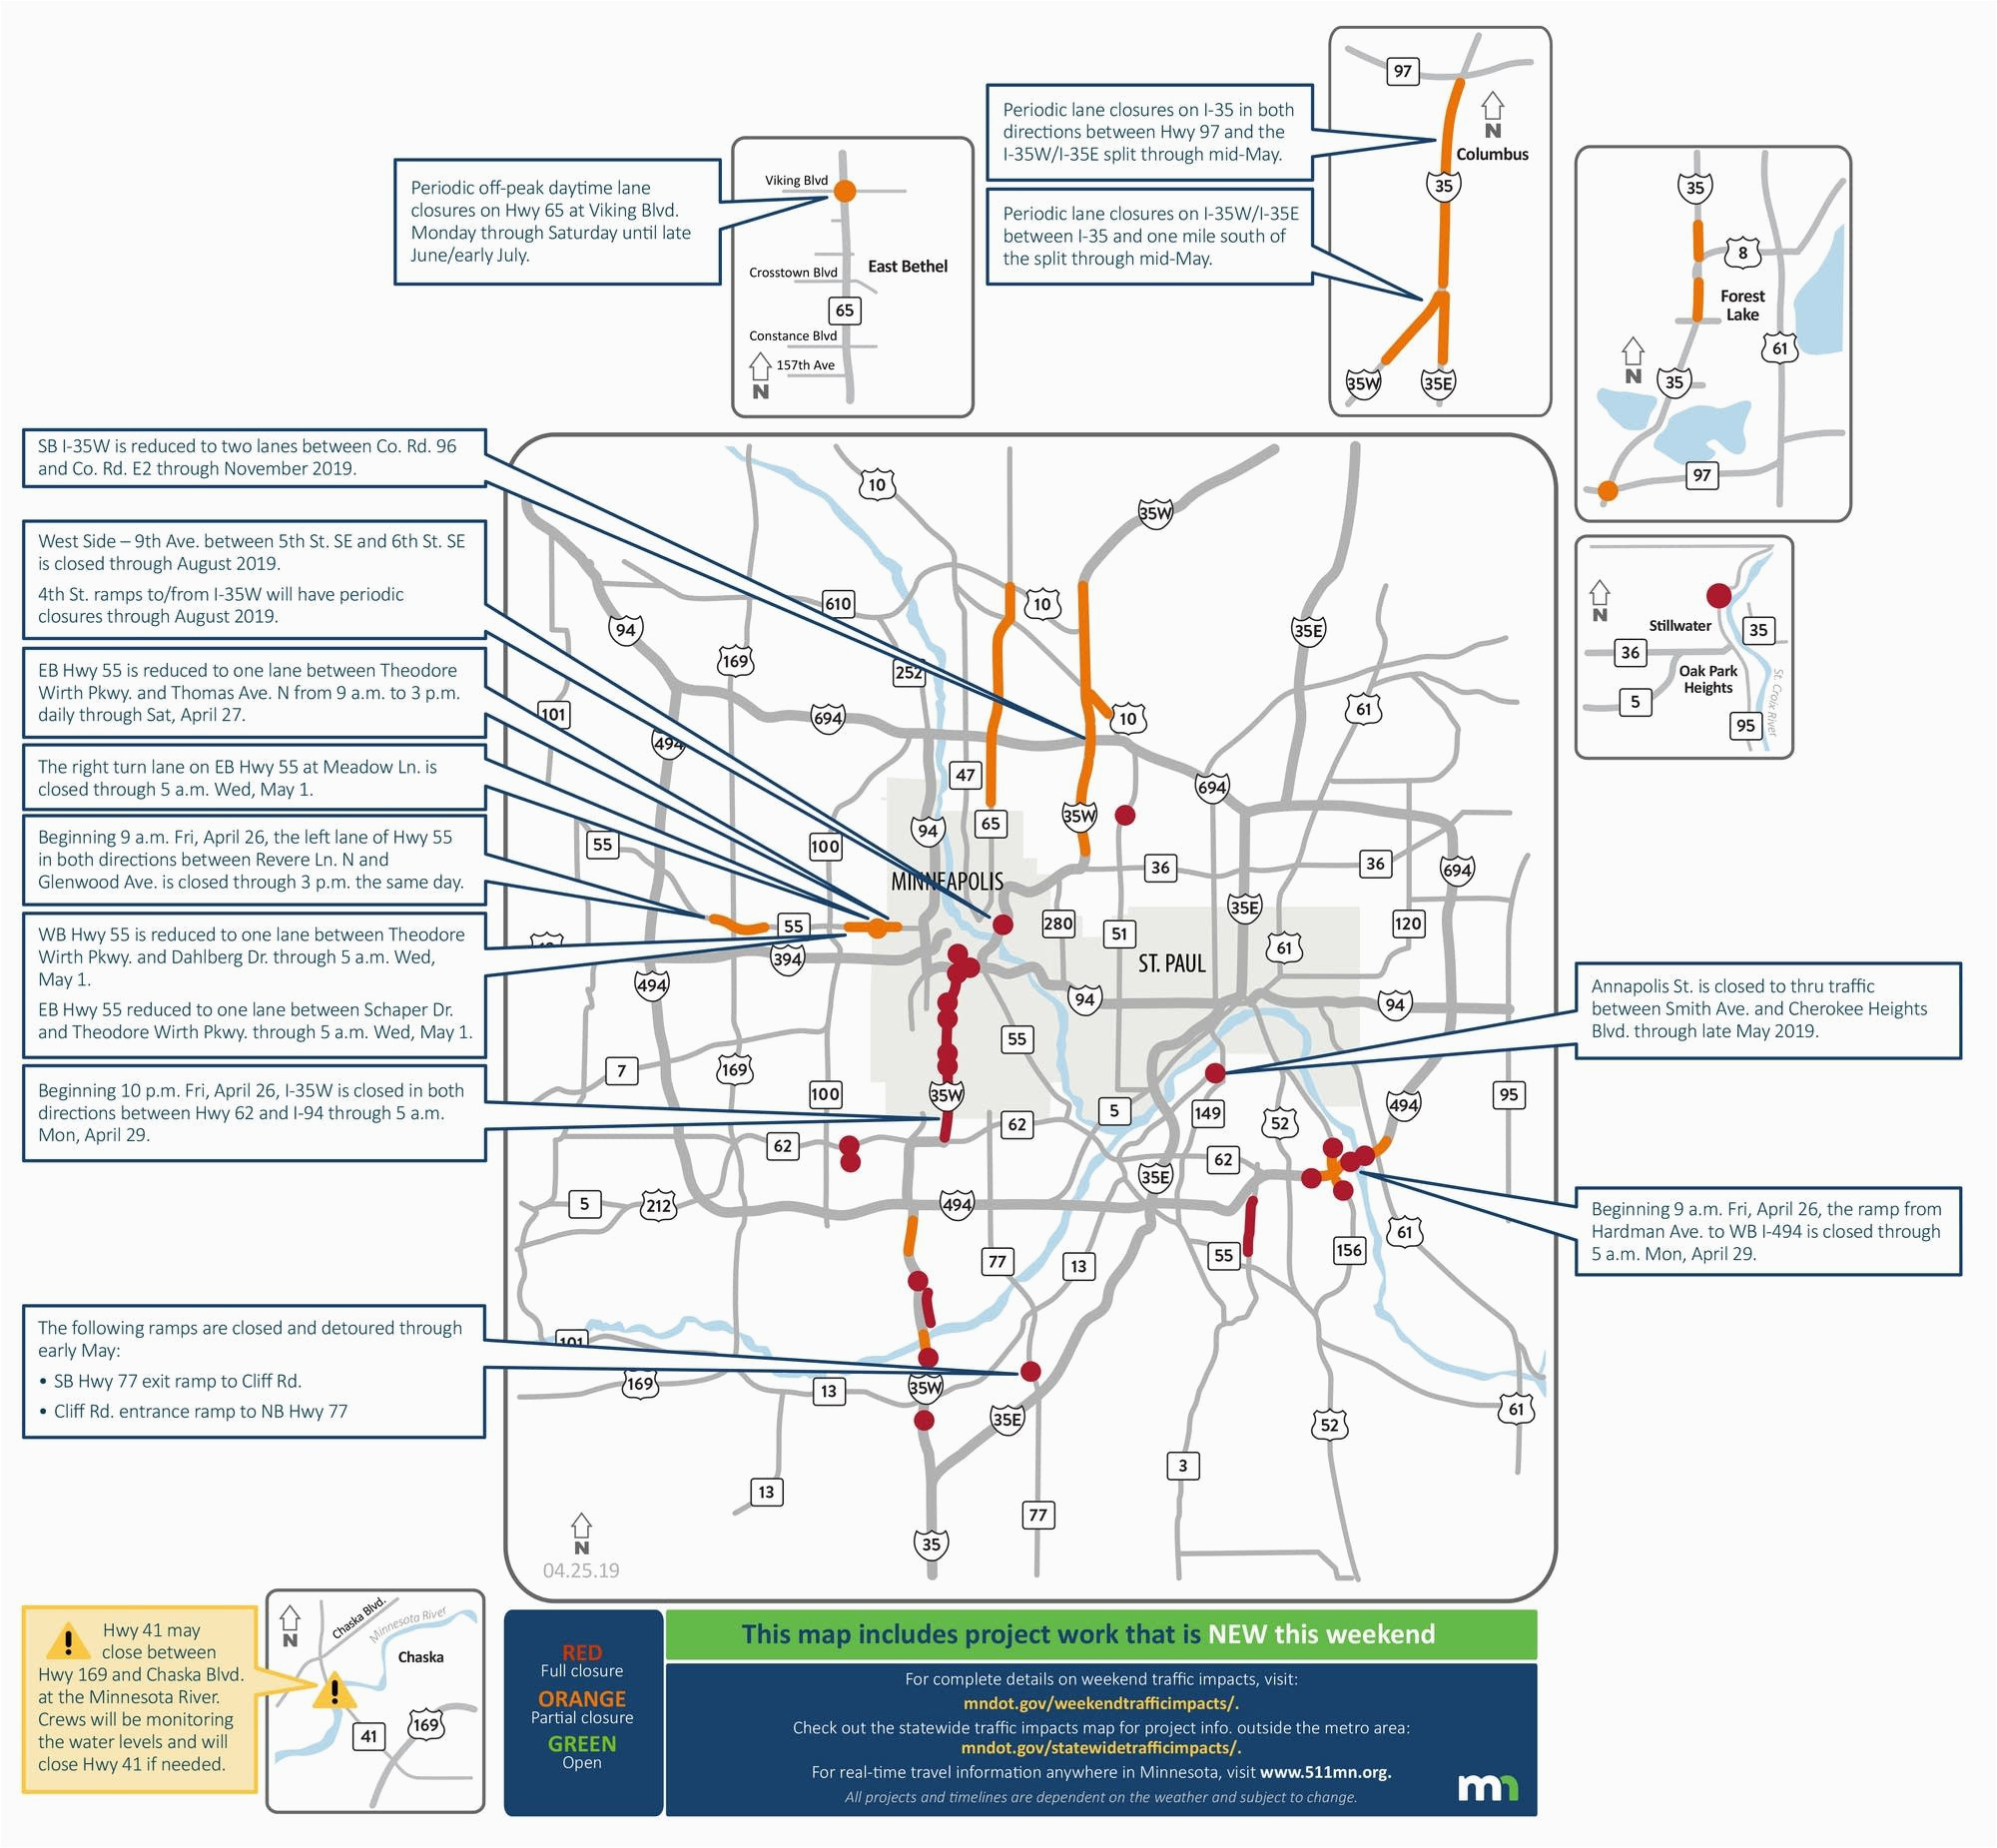 Minnesota Highway Closures Map Closures On I 35w Lane Reductions Throughout Metro Area This Of Minnesota Highway Closures Map 